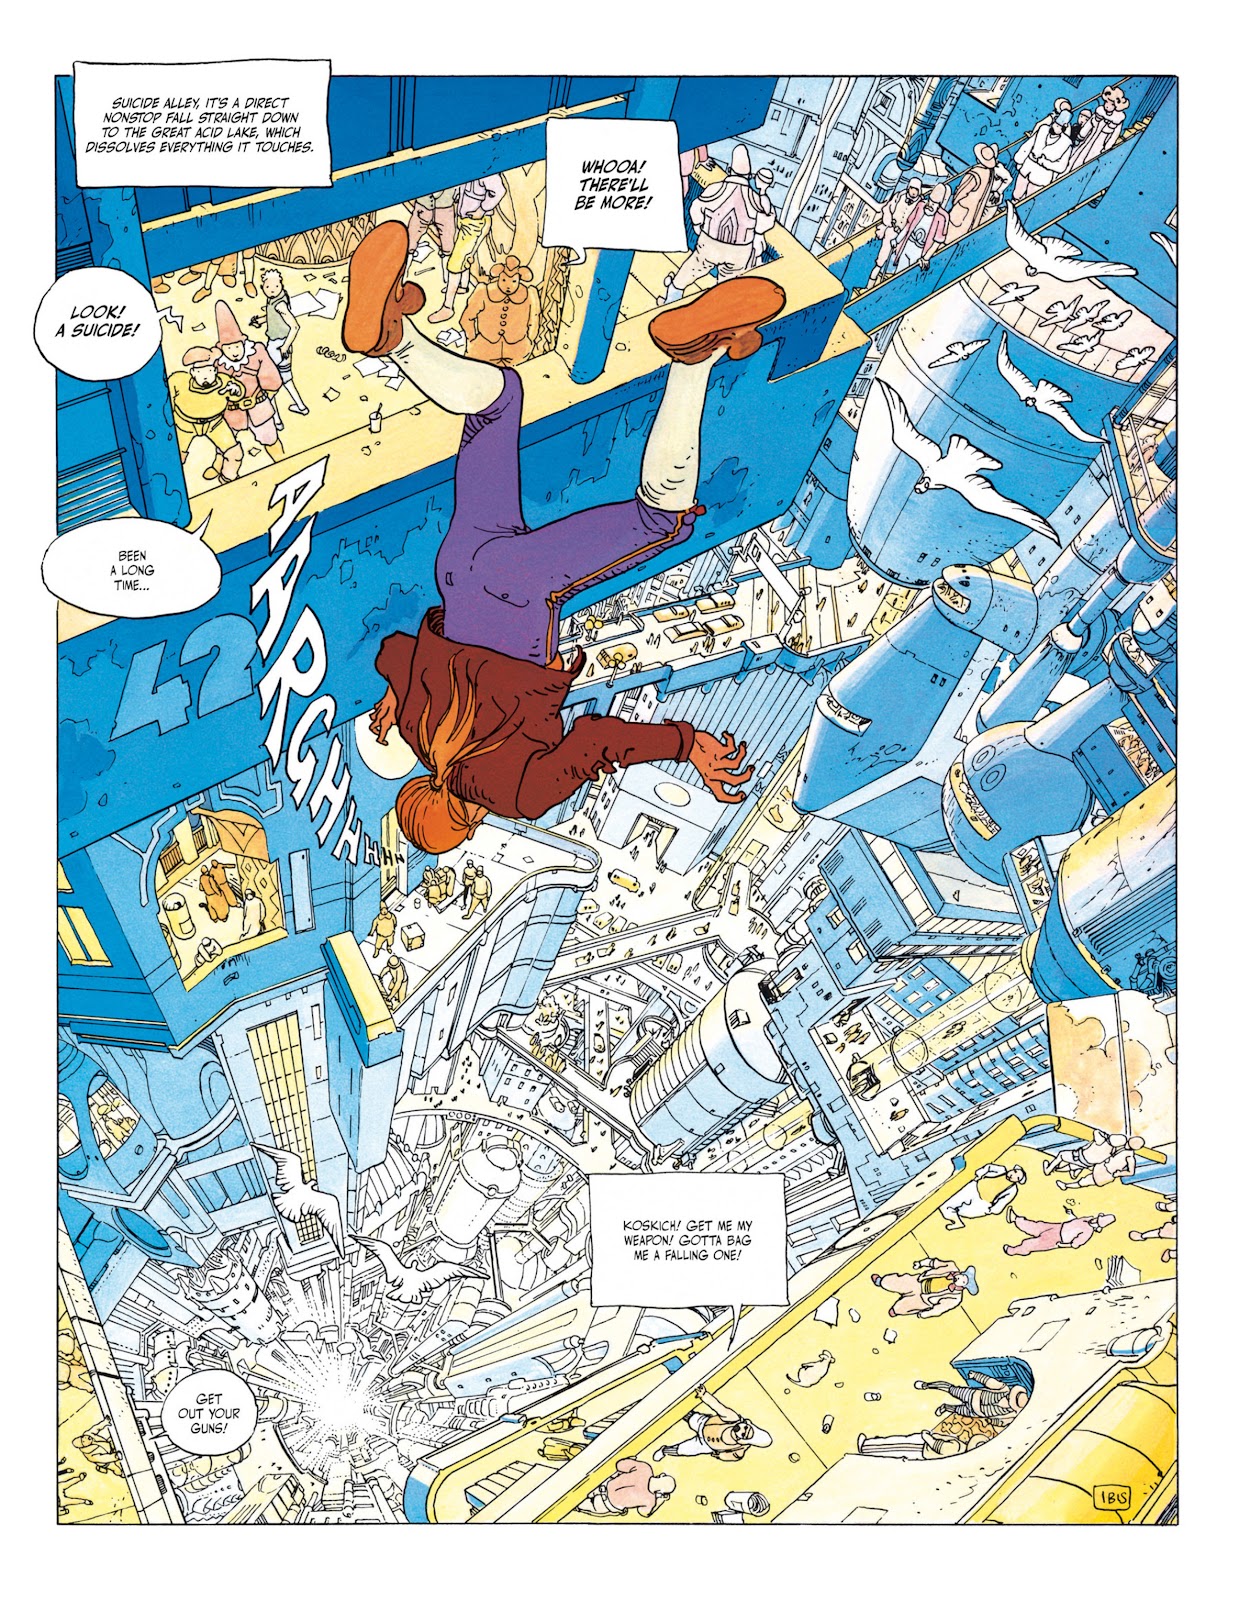 Page from The Incal. John DiFool plummets into a huge shaft.